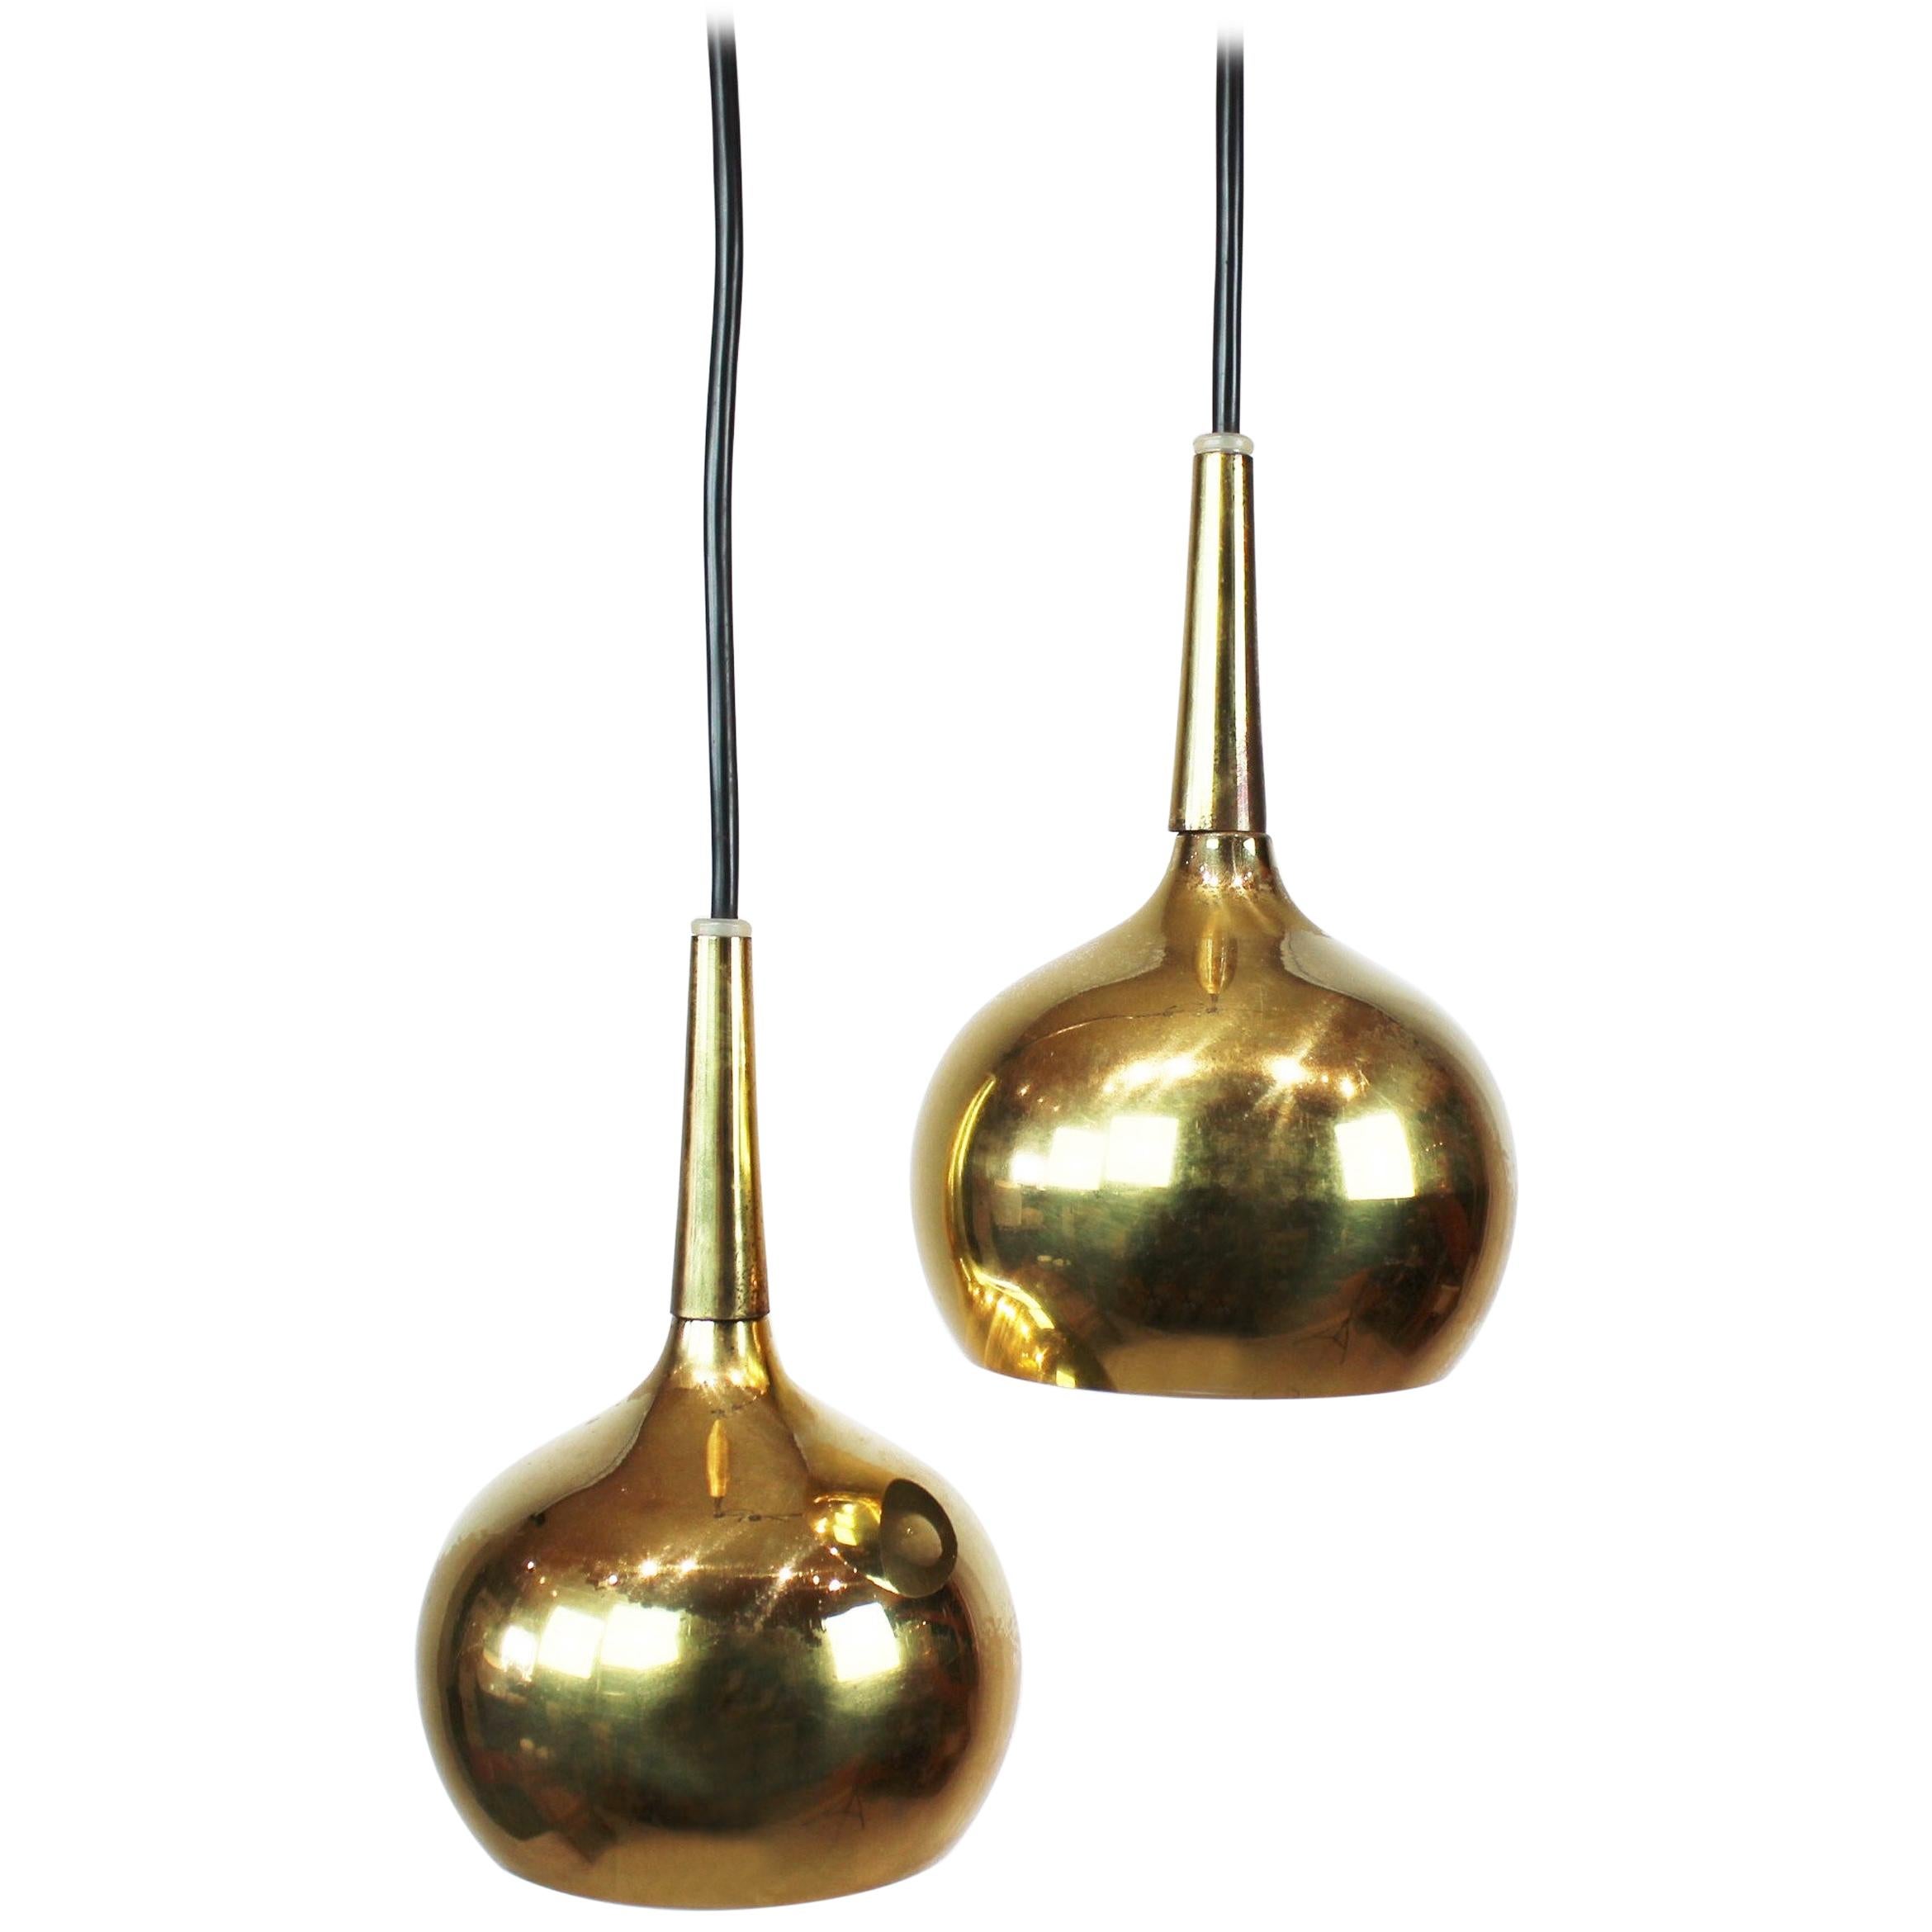 Pair of Brass Pendants of Danish Design from the 1960s